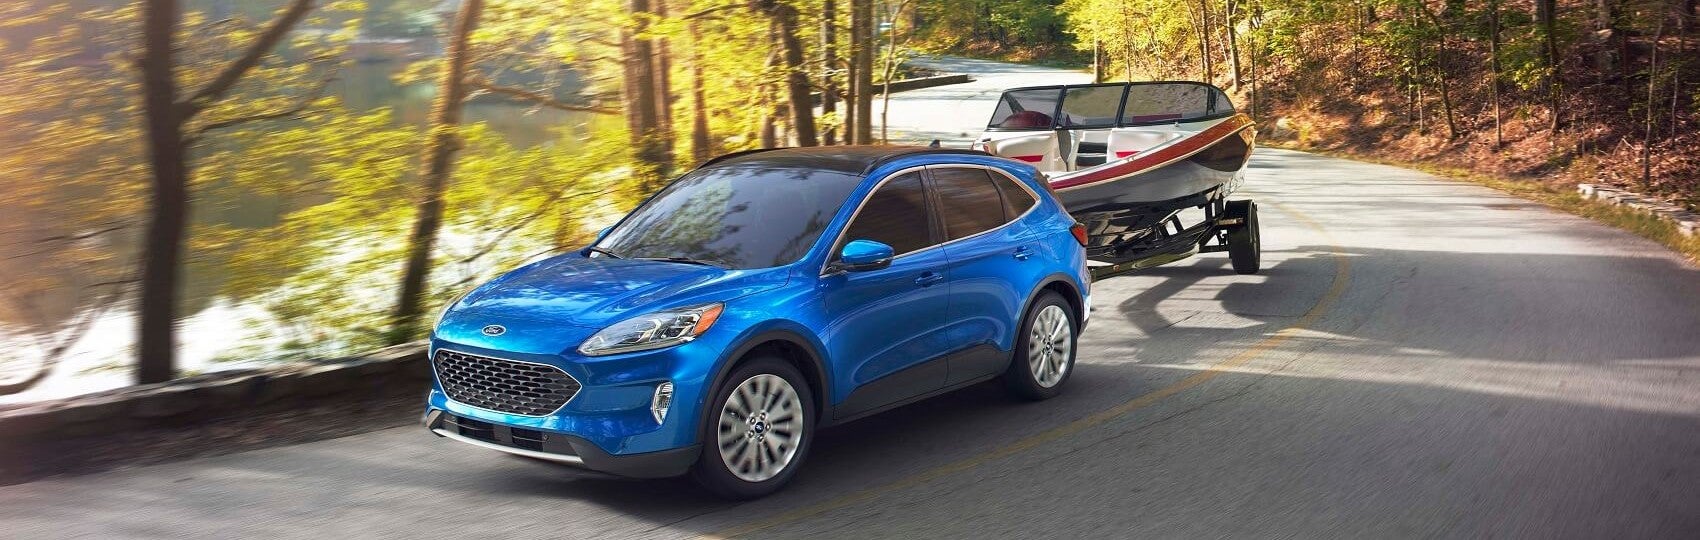 2020 Ford Escape Review 